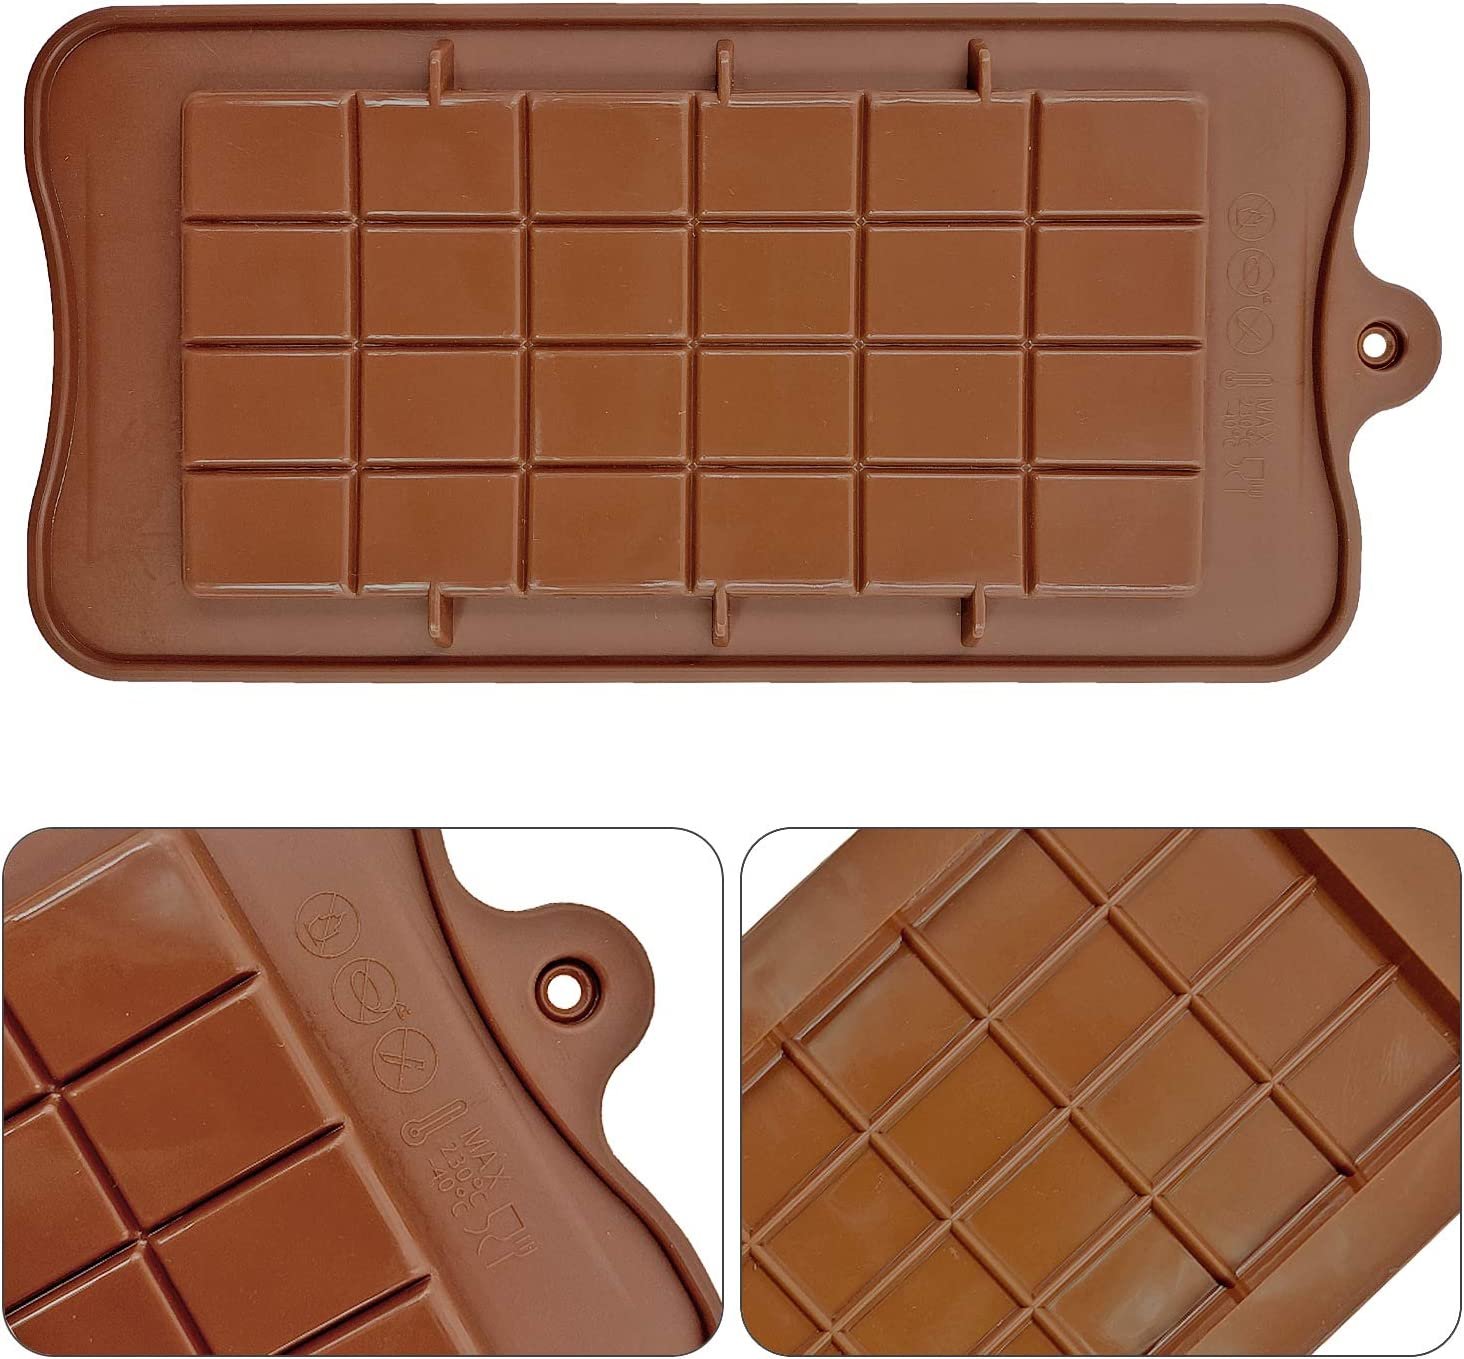 Chocolate Bar Molds - Silicone Break Apart Protein and Engery Bar